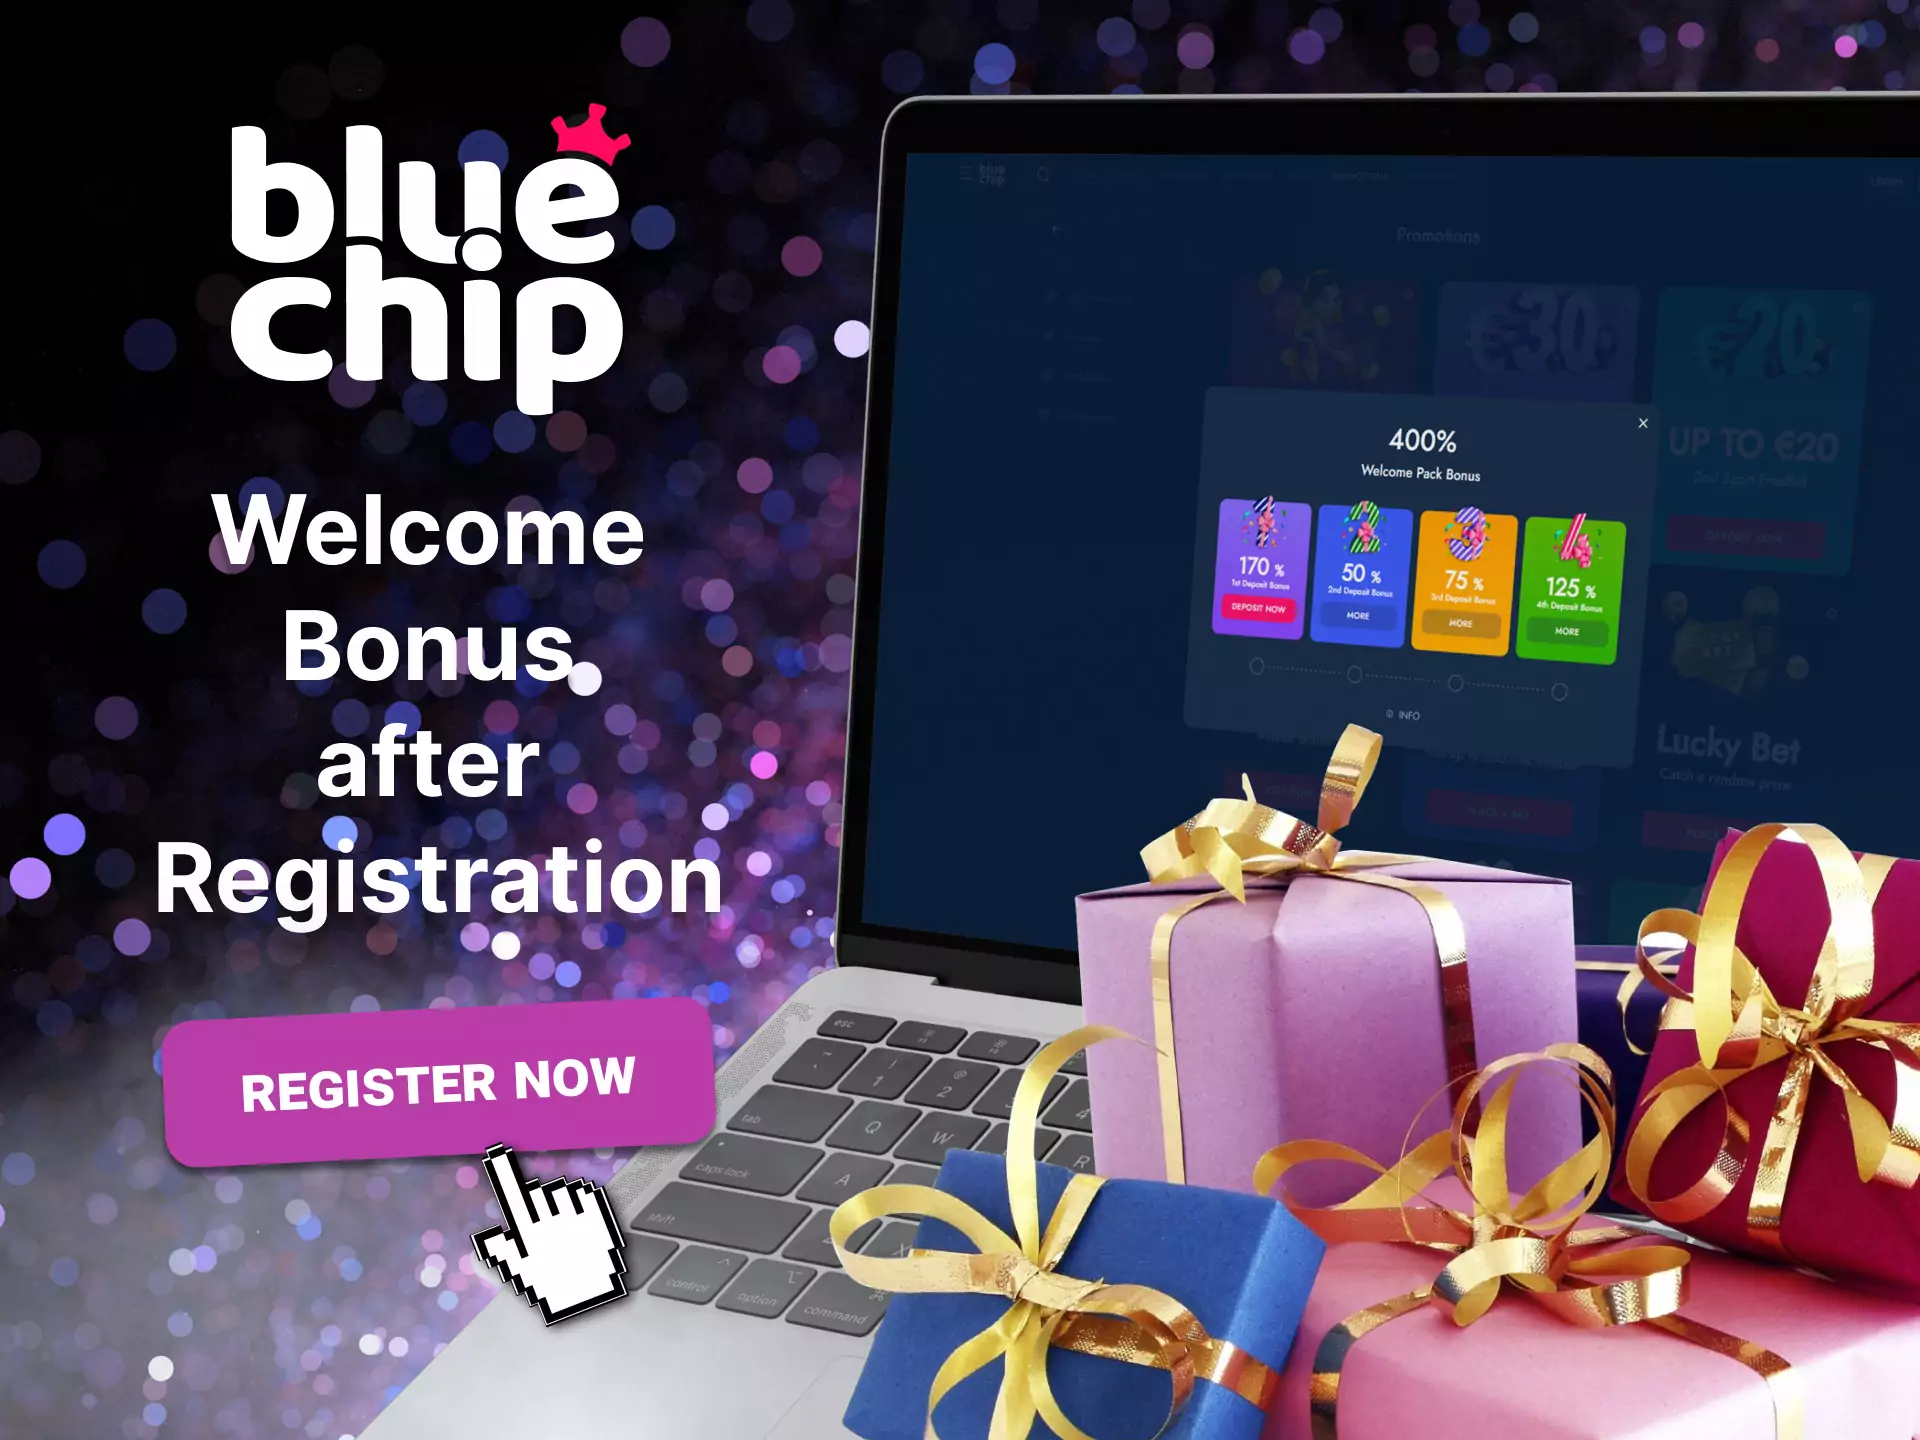 Get a special welcome bonus right after signing up for Bluechip.